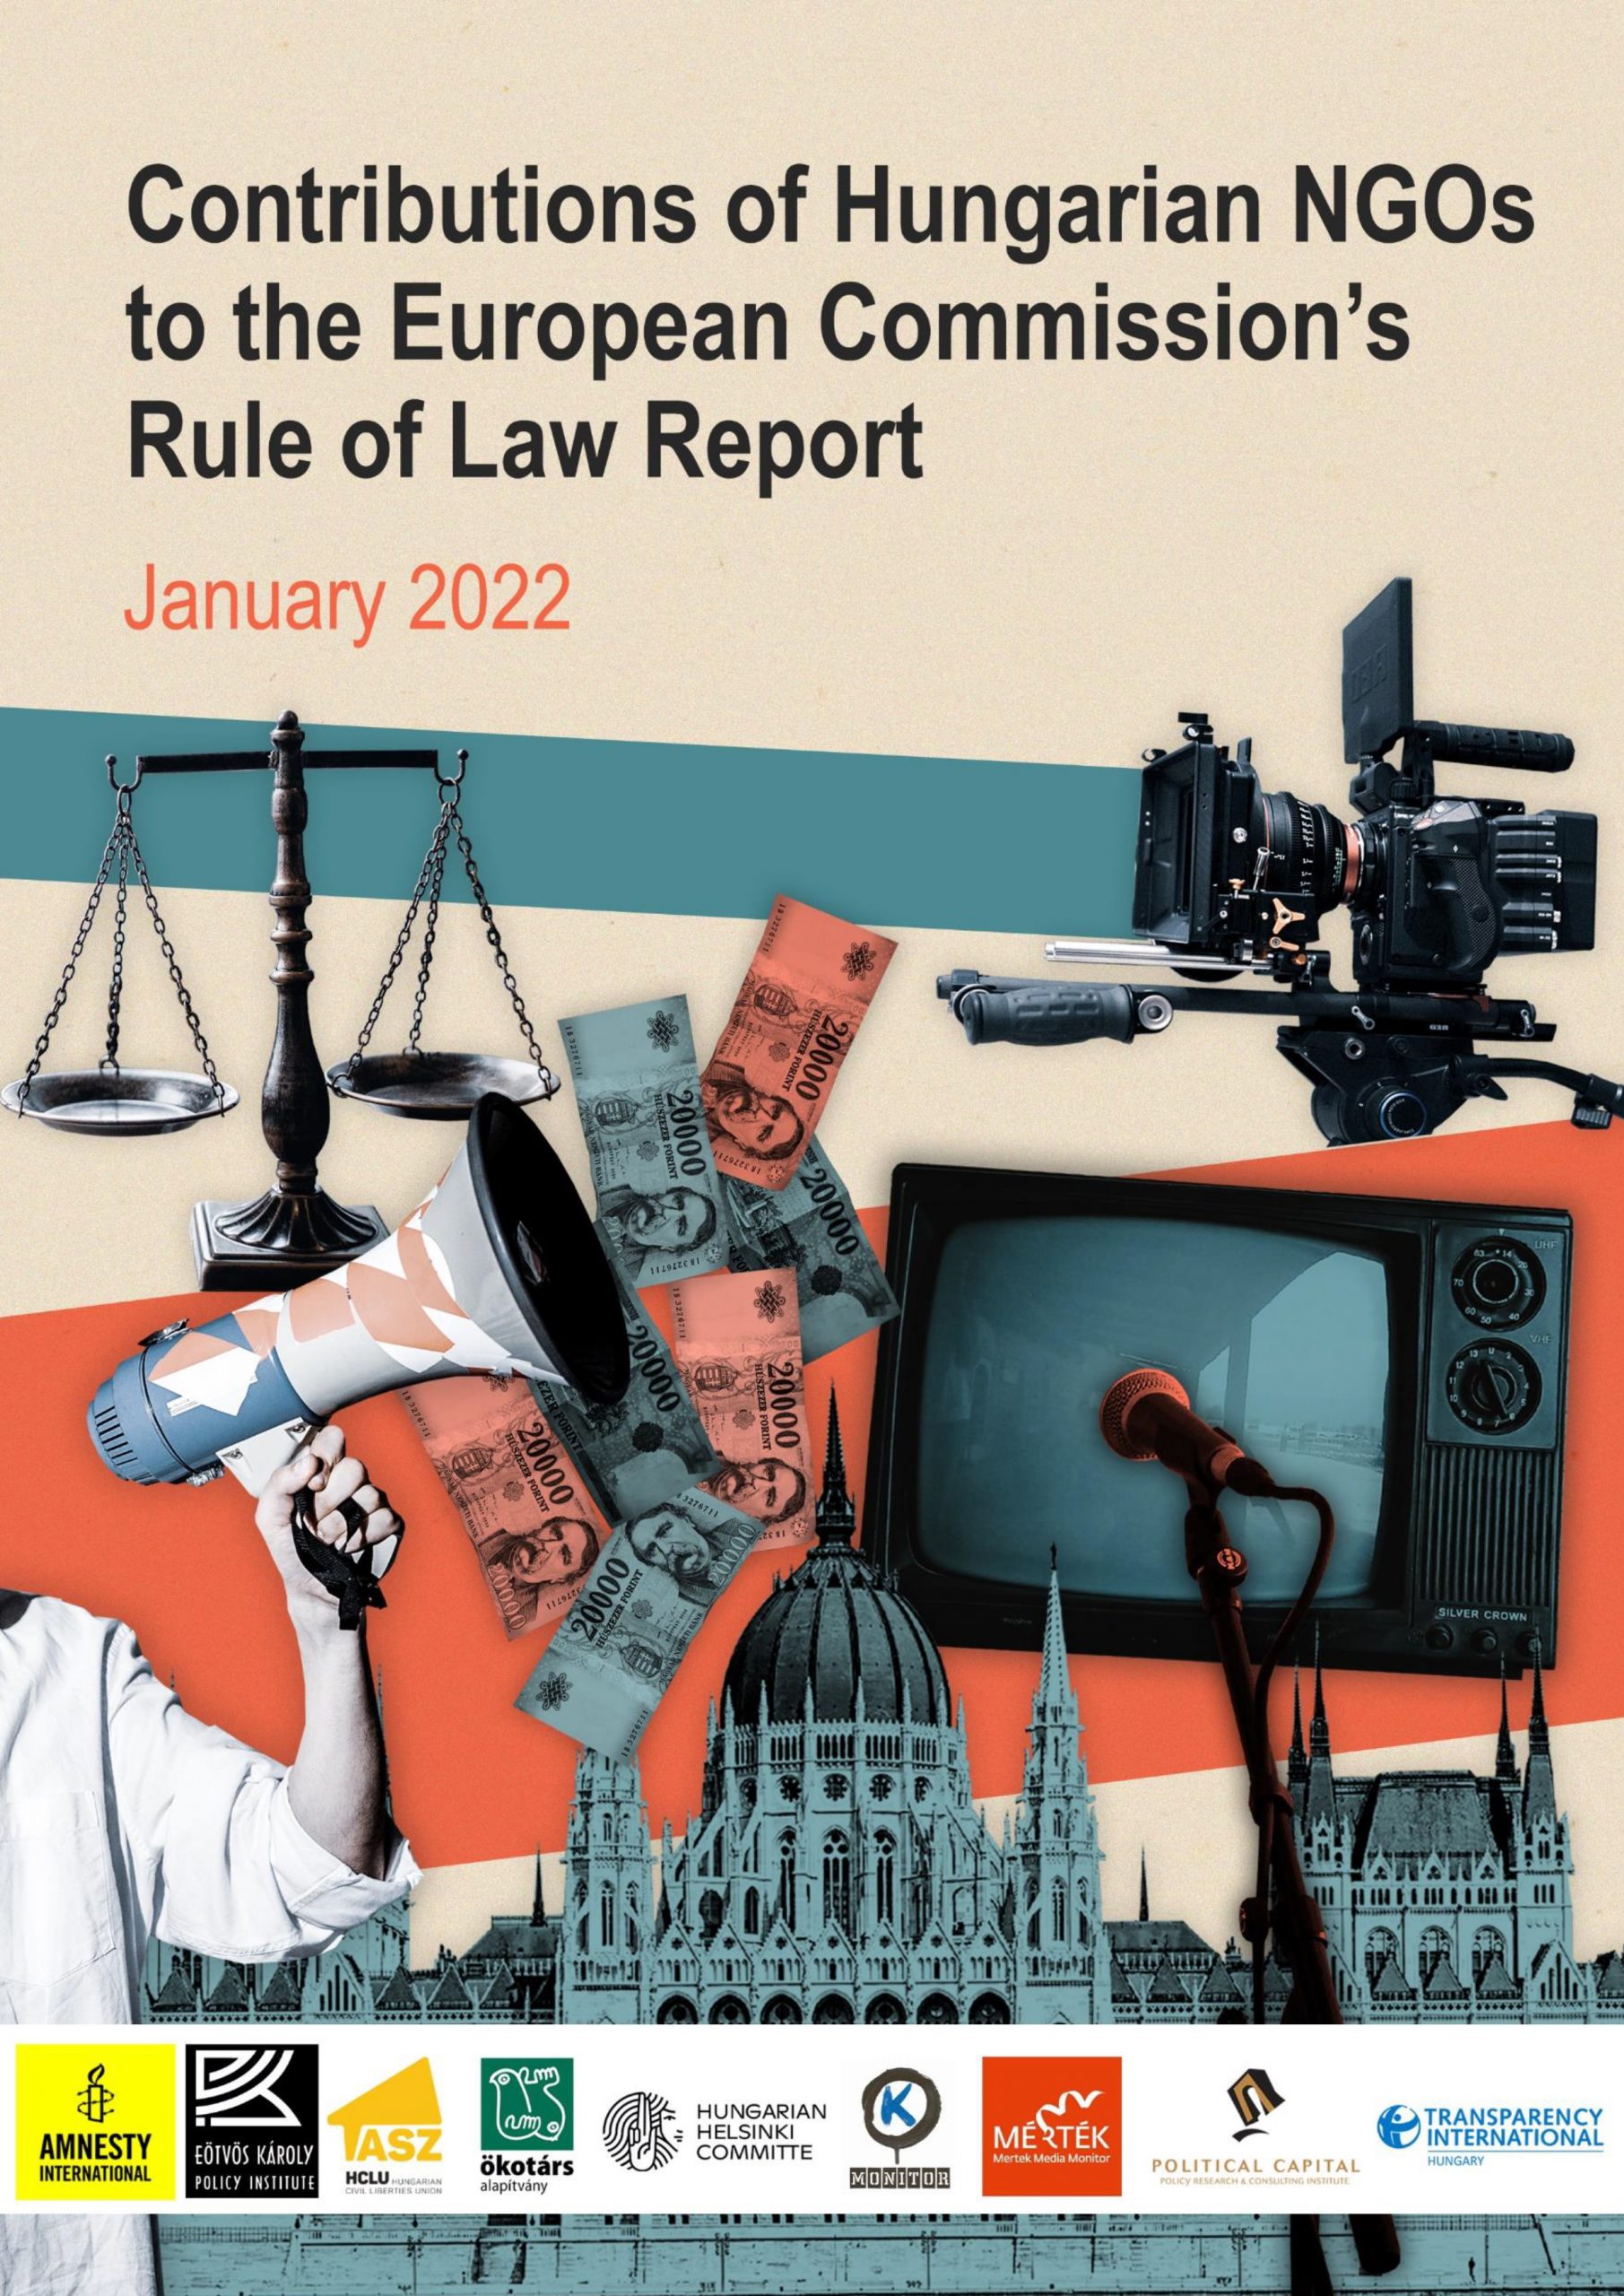 Cover of the 2022 joint NGO submission to the European Commission's Rule of Law Report